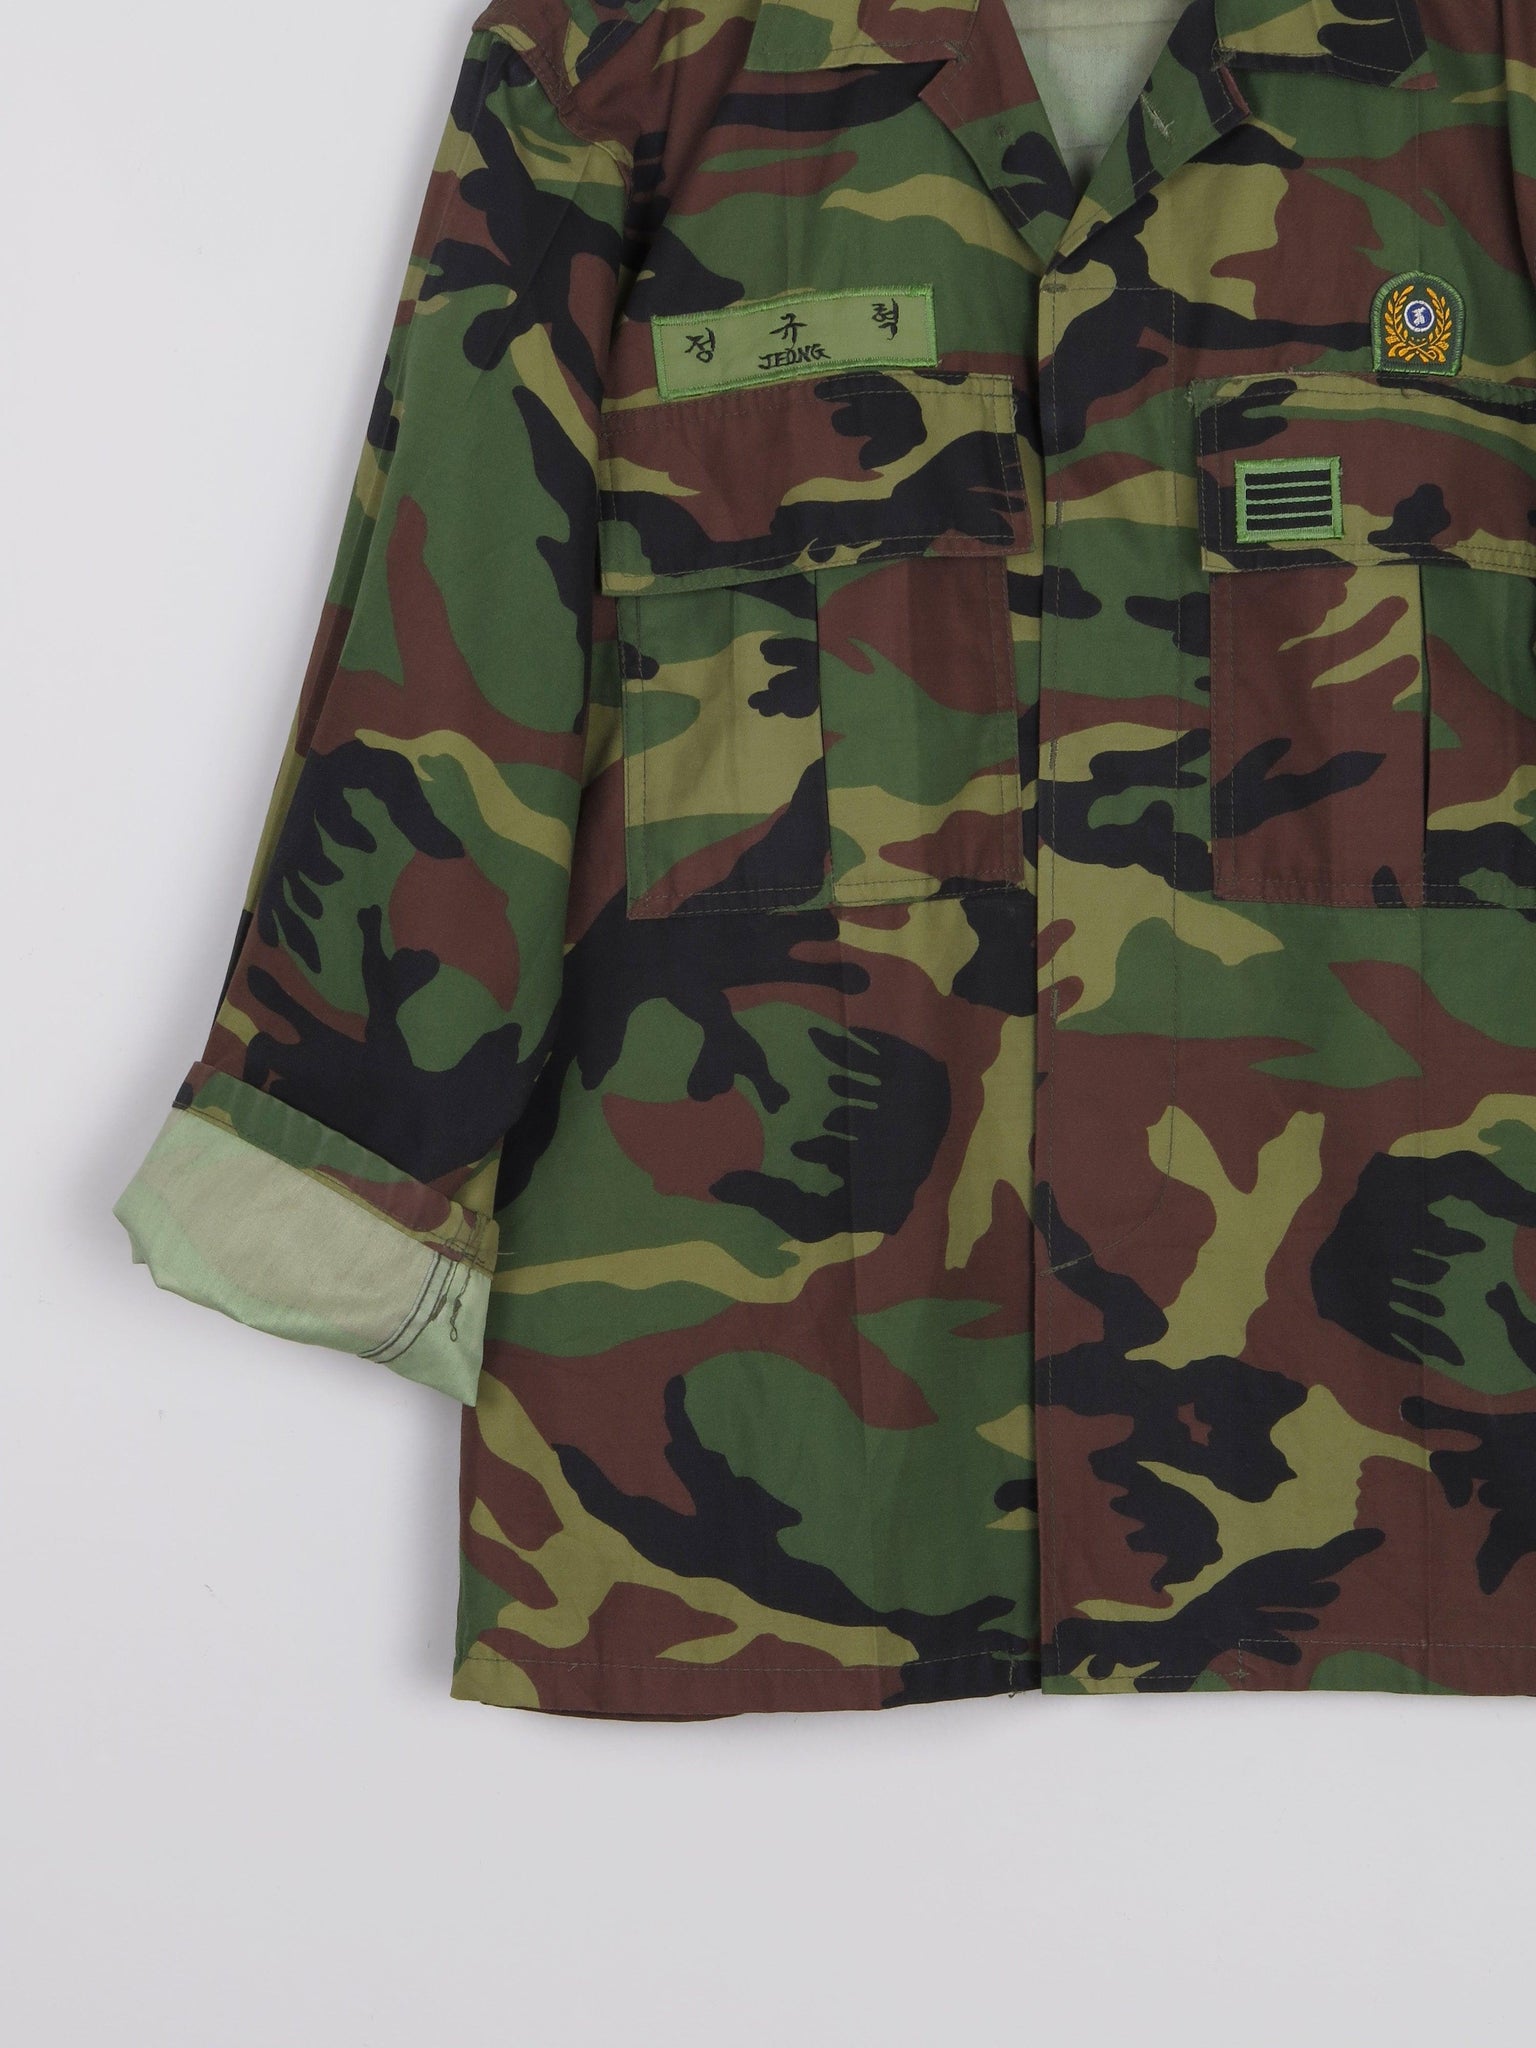 Men's Green Camouflage Army Shirt M - The Harlequin